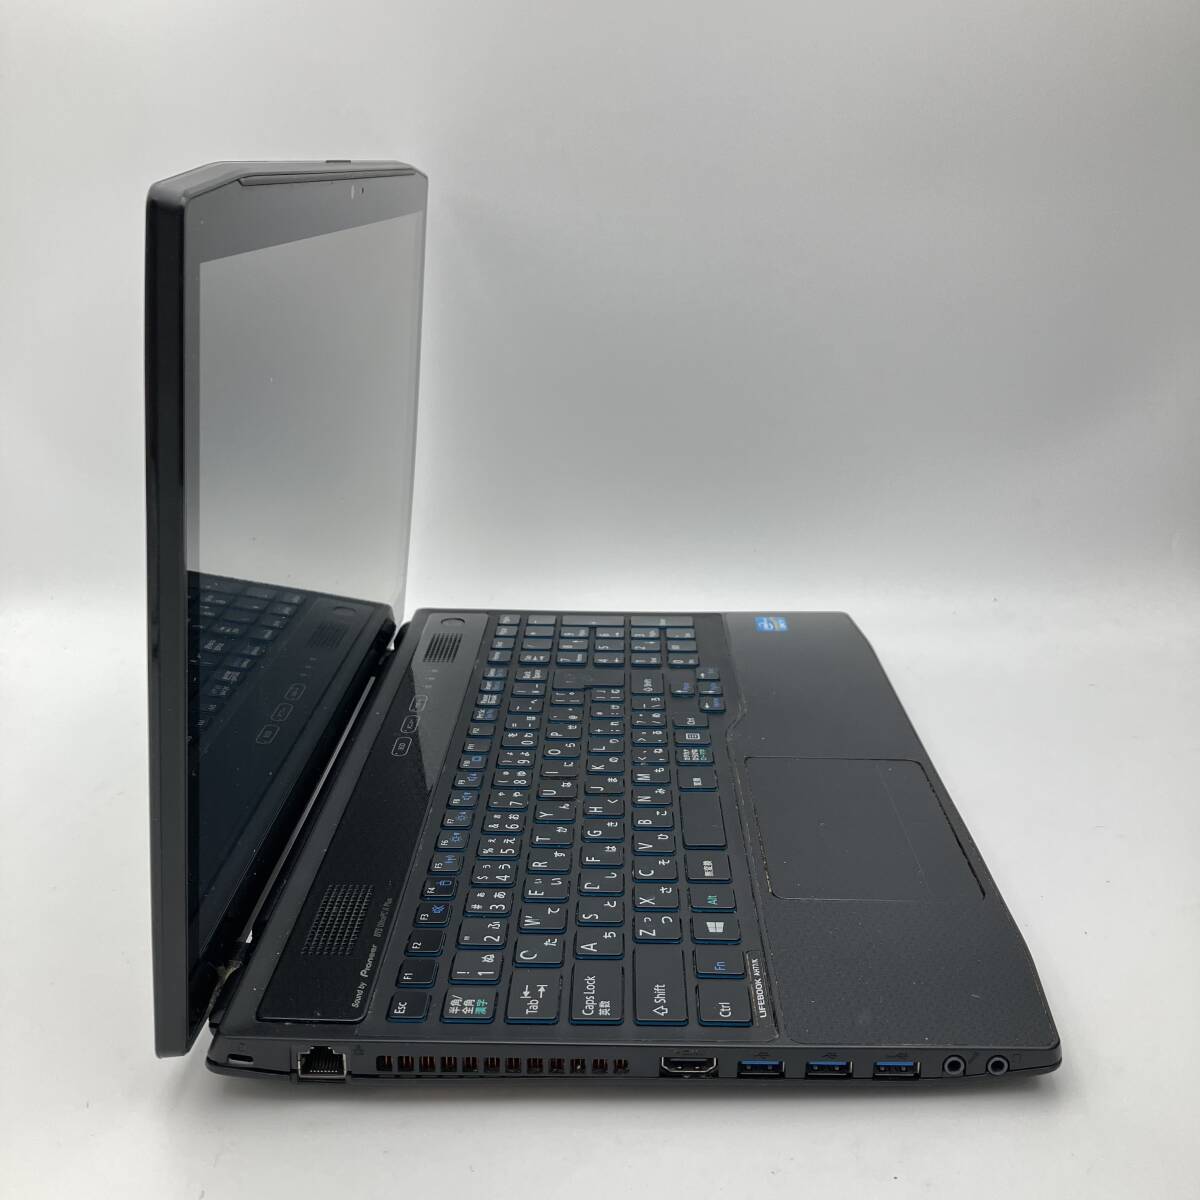  high speed i7[ memory 16GB/. speed new goods SSD/Core i7-3.20GHz]Windows11 laptop,Office2021,Blu-ray,USB3.0, battery replaced, successful bid privilege 1TB and more 